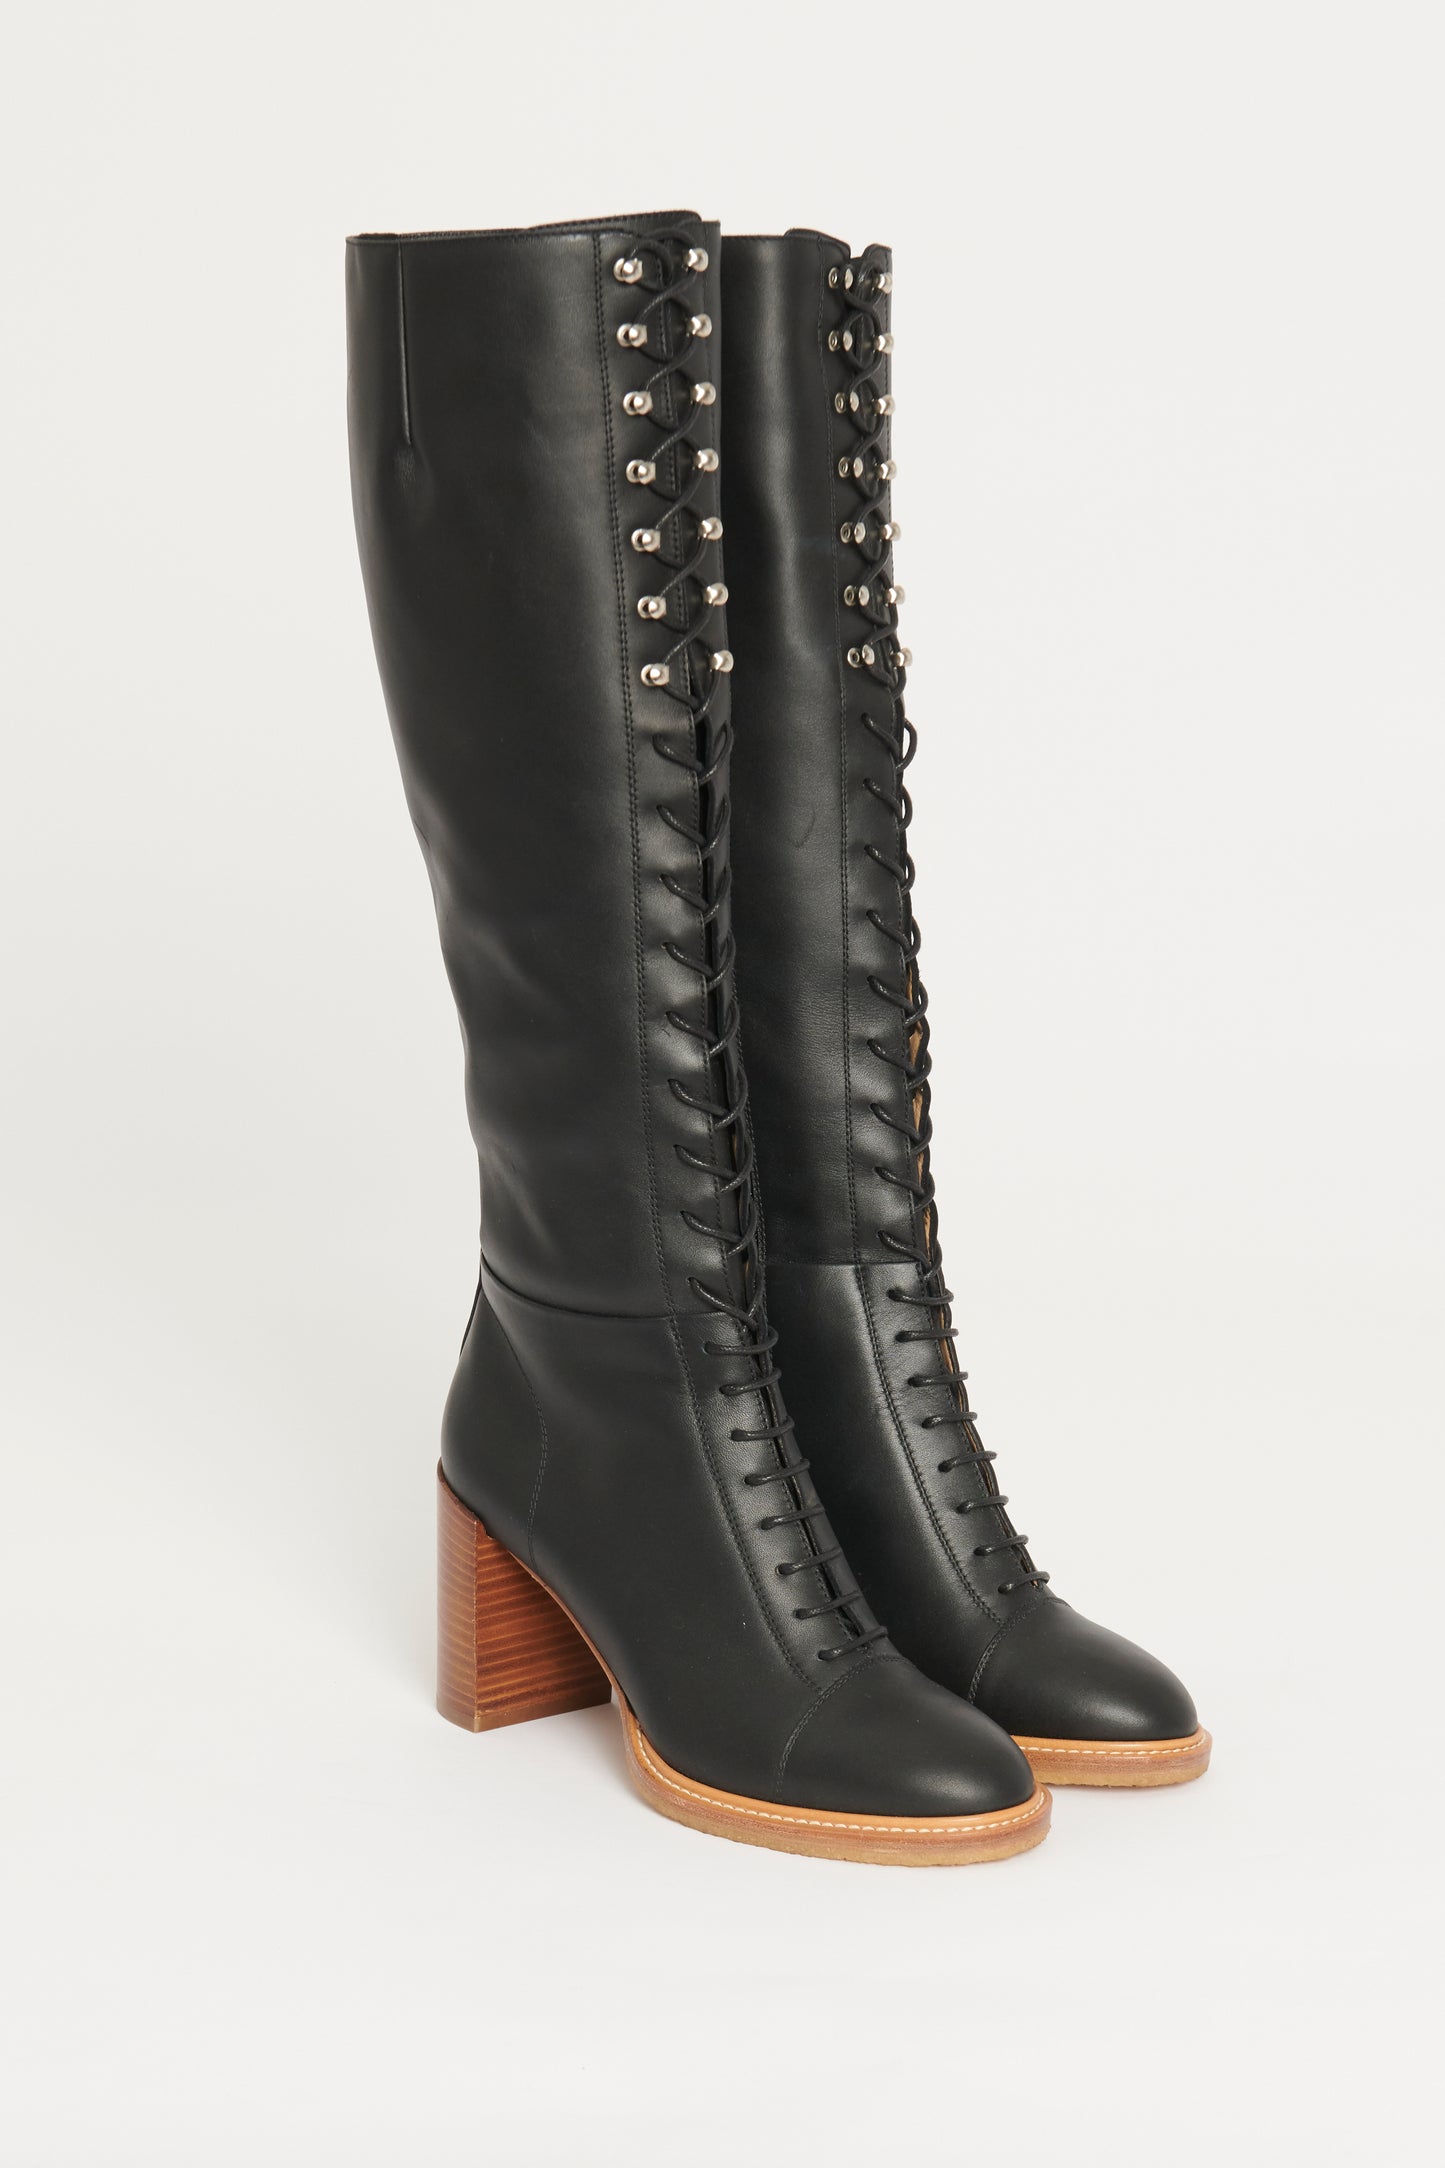 Black Leather Pat 75 Preowned Knee-High Boots